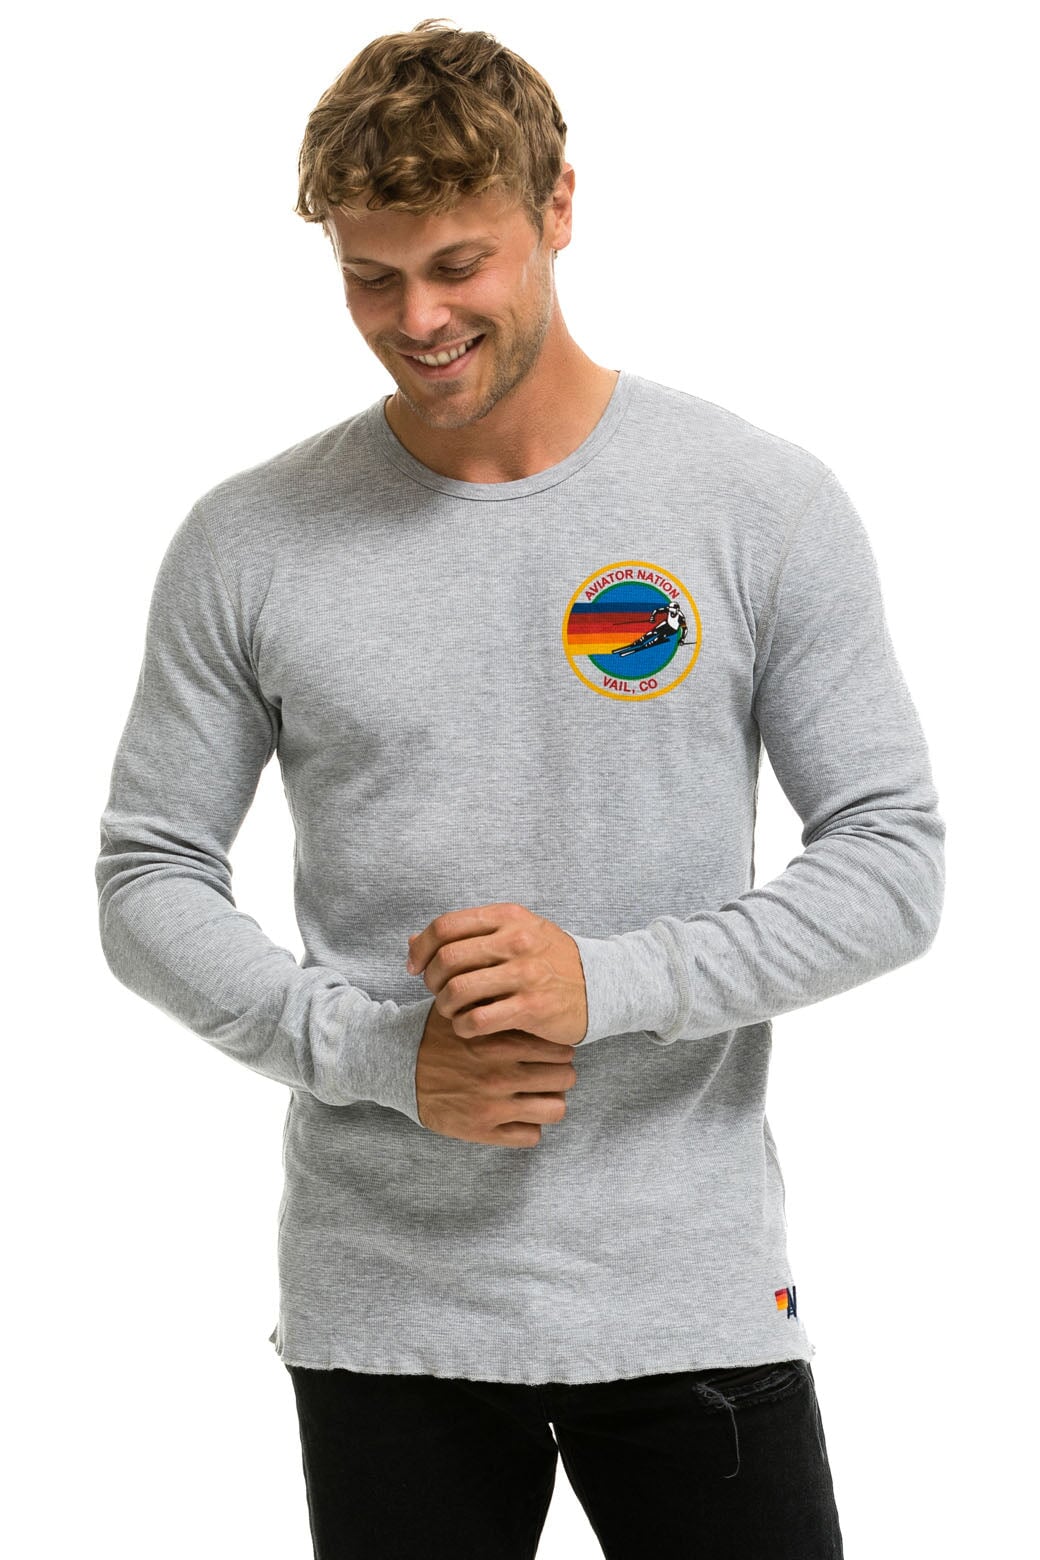 AVIATOR NATION VAIL THERMAL - HEATHER GREY Thermal Aviator Nation 